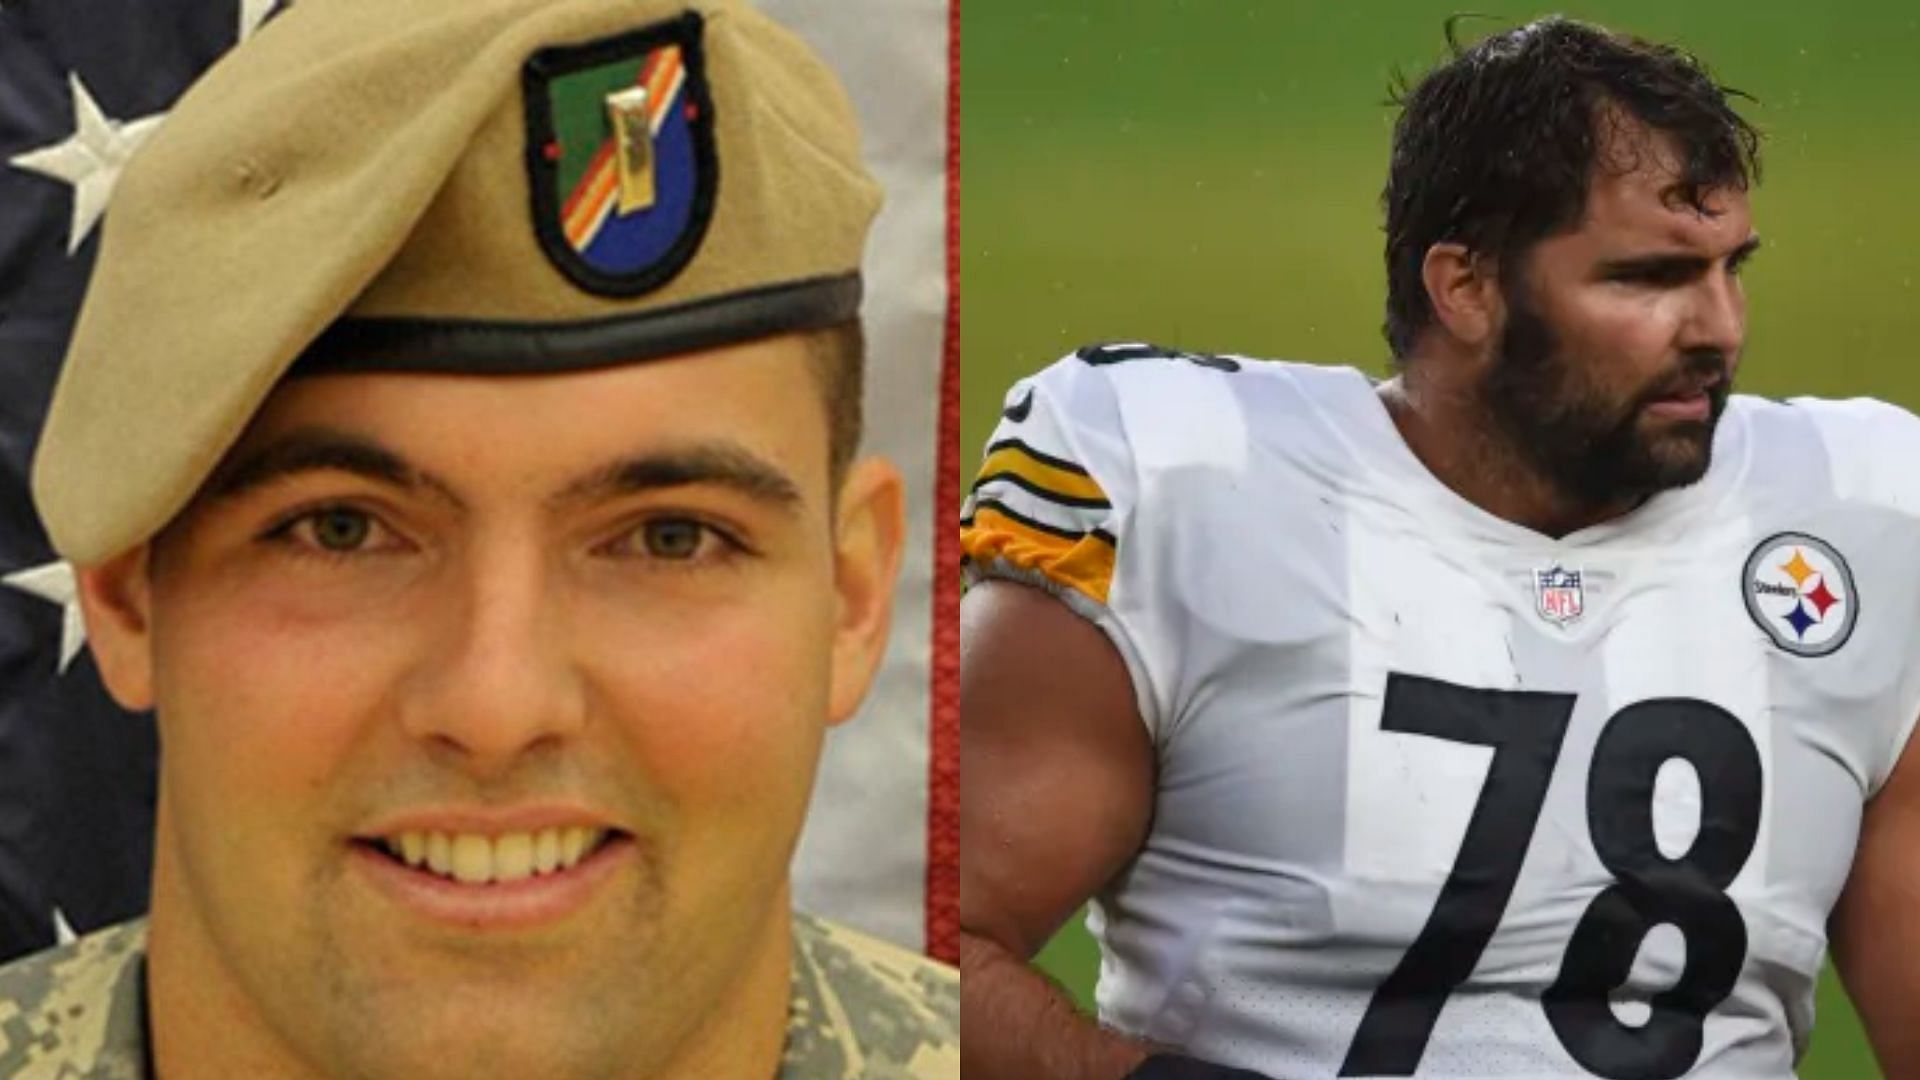 Alejandro Villanueva served in the US Army before playing in the NFL. (Image credit: Philadelphia Eagles official website, Getty Images)